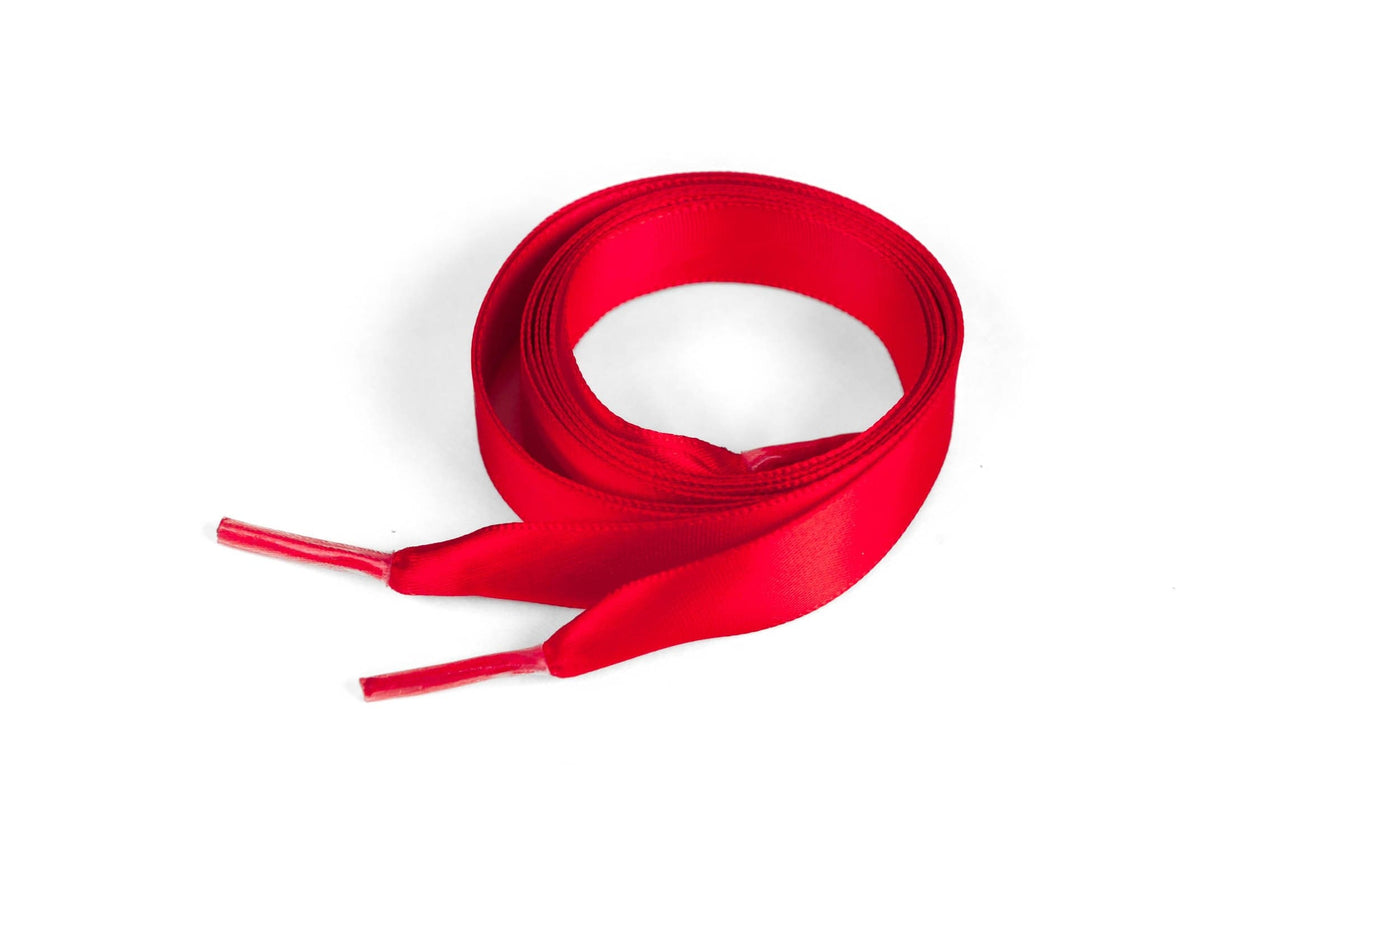 Satin Ribbon 5/8" Premium Quality Shoelaces - 54" Inch Length Red